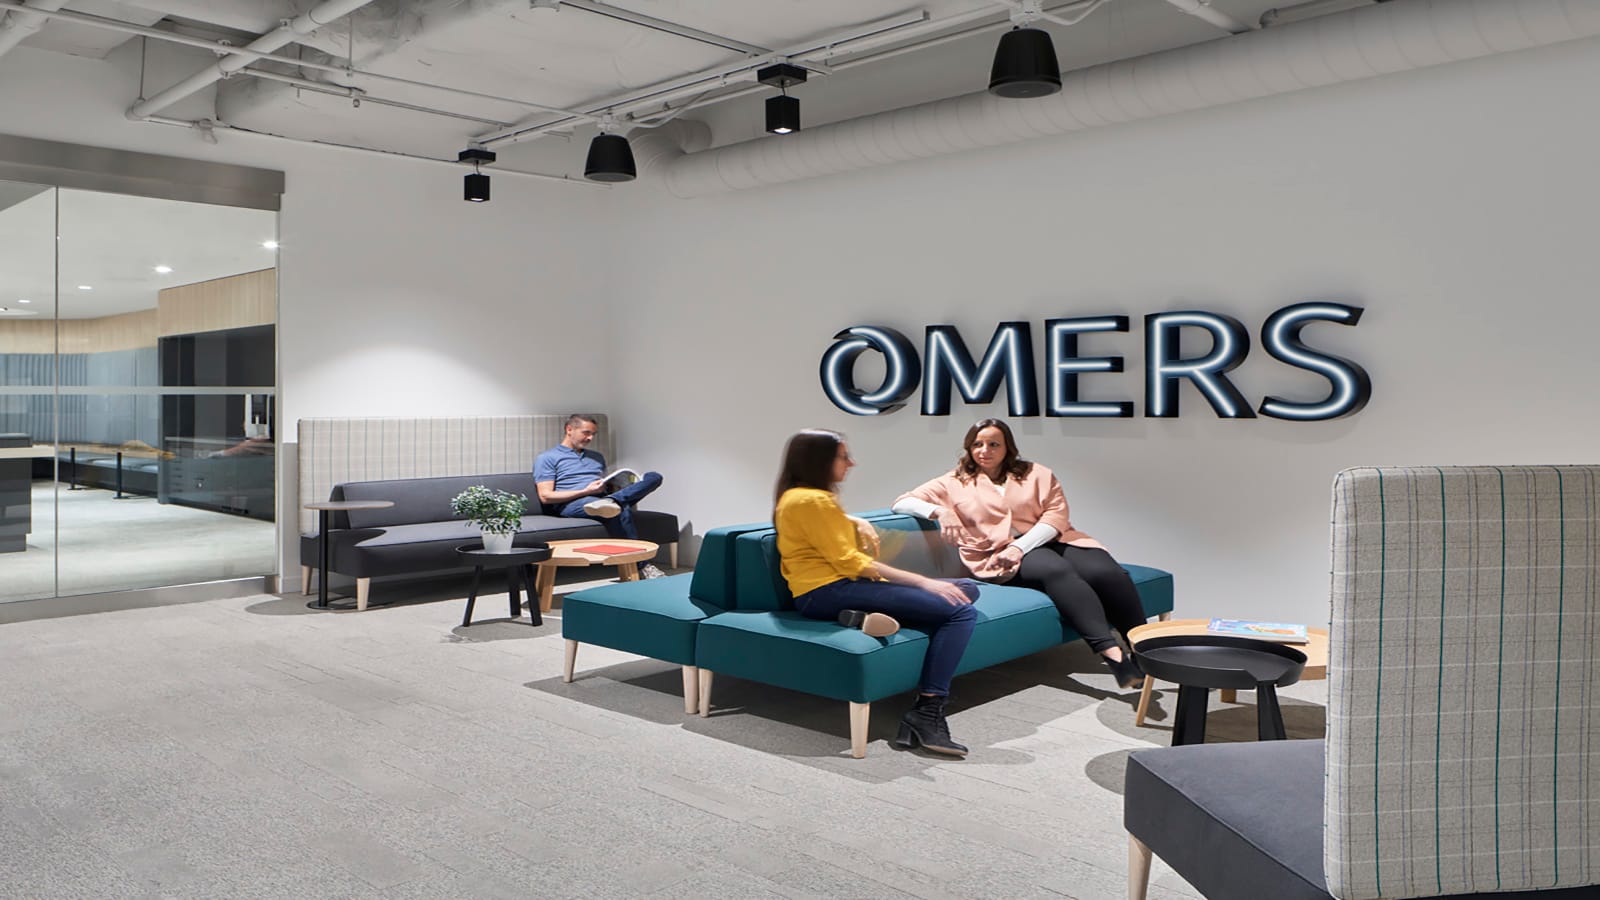 A comfortable seating area awaits guests at the OMERS workplace